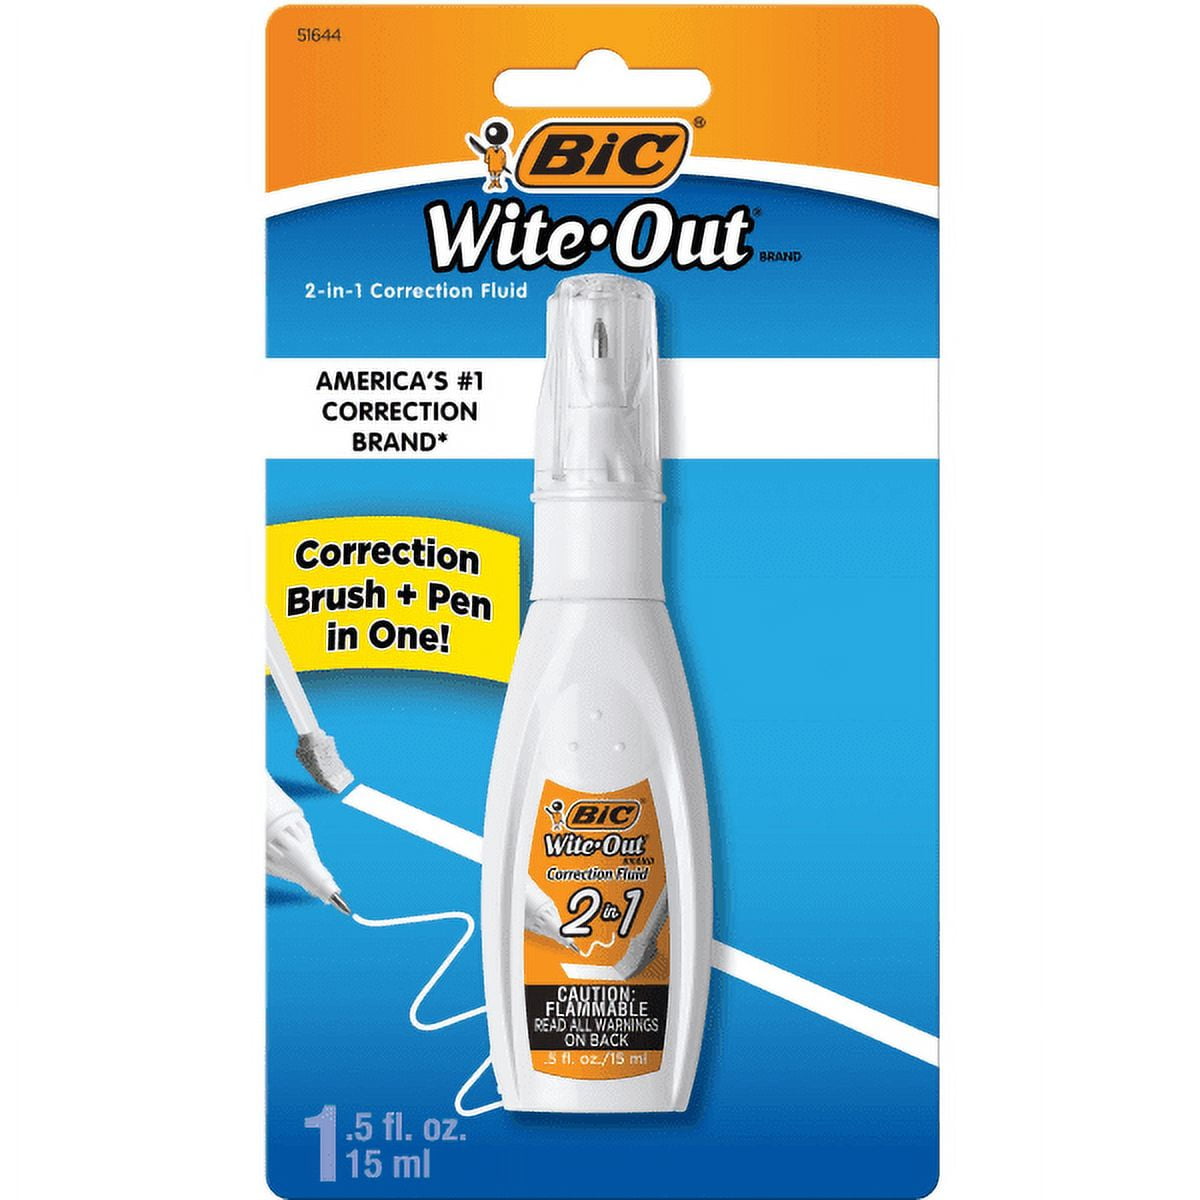 BIC® Wite-Out® Brand Quick Dry Correction Fluid, Bright White Fluid, 0.7  oz, 1-Count